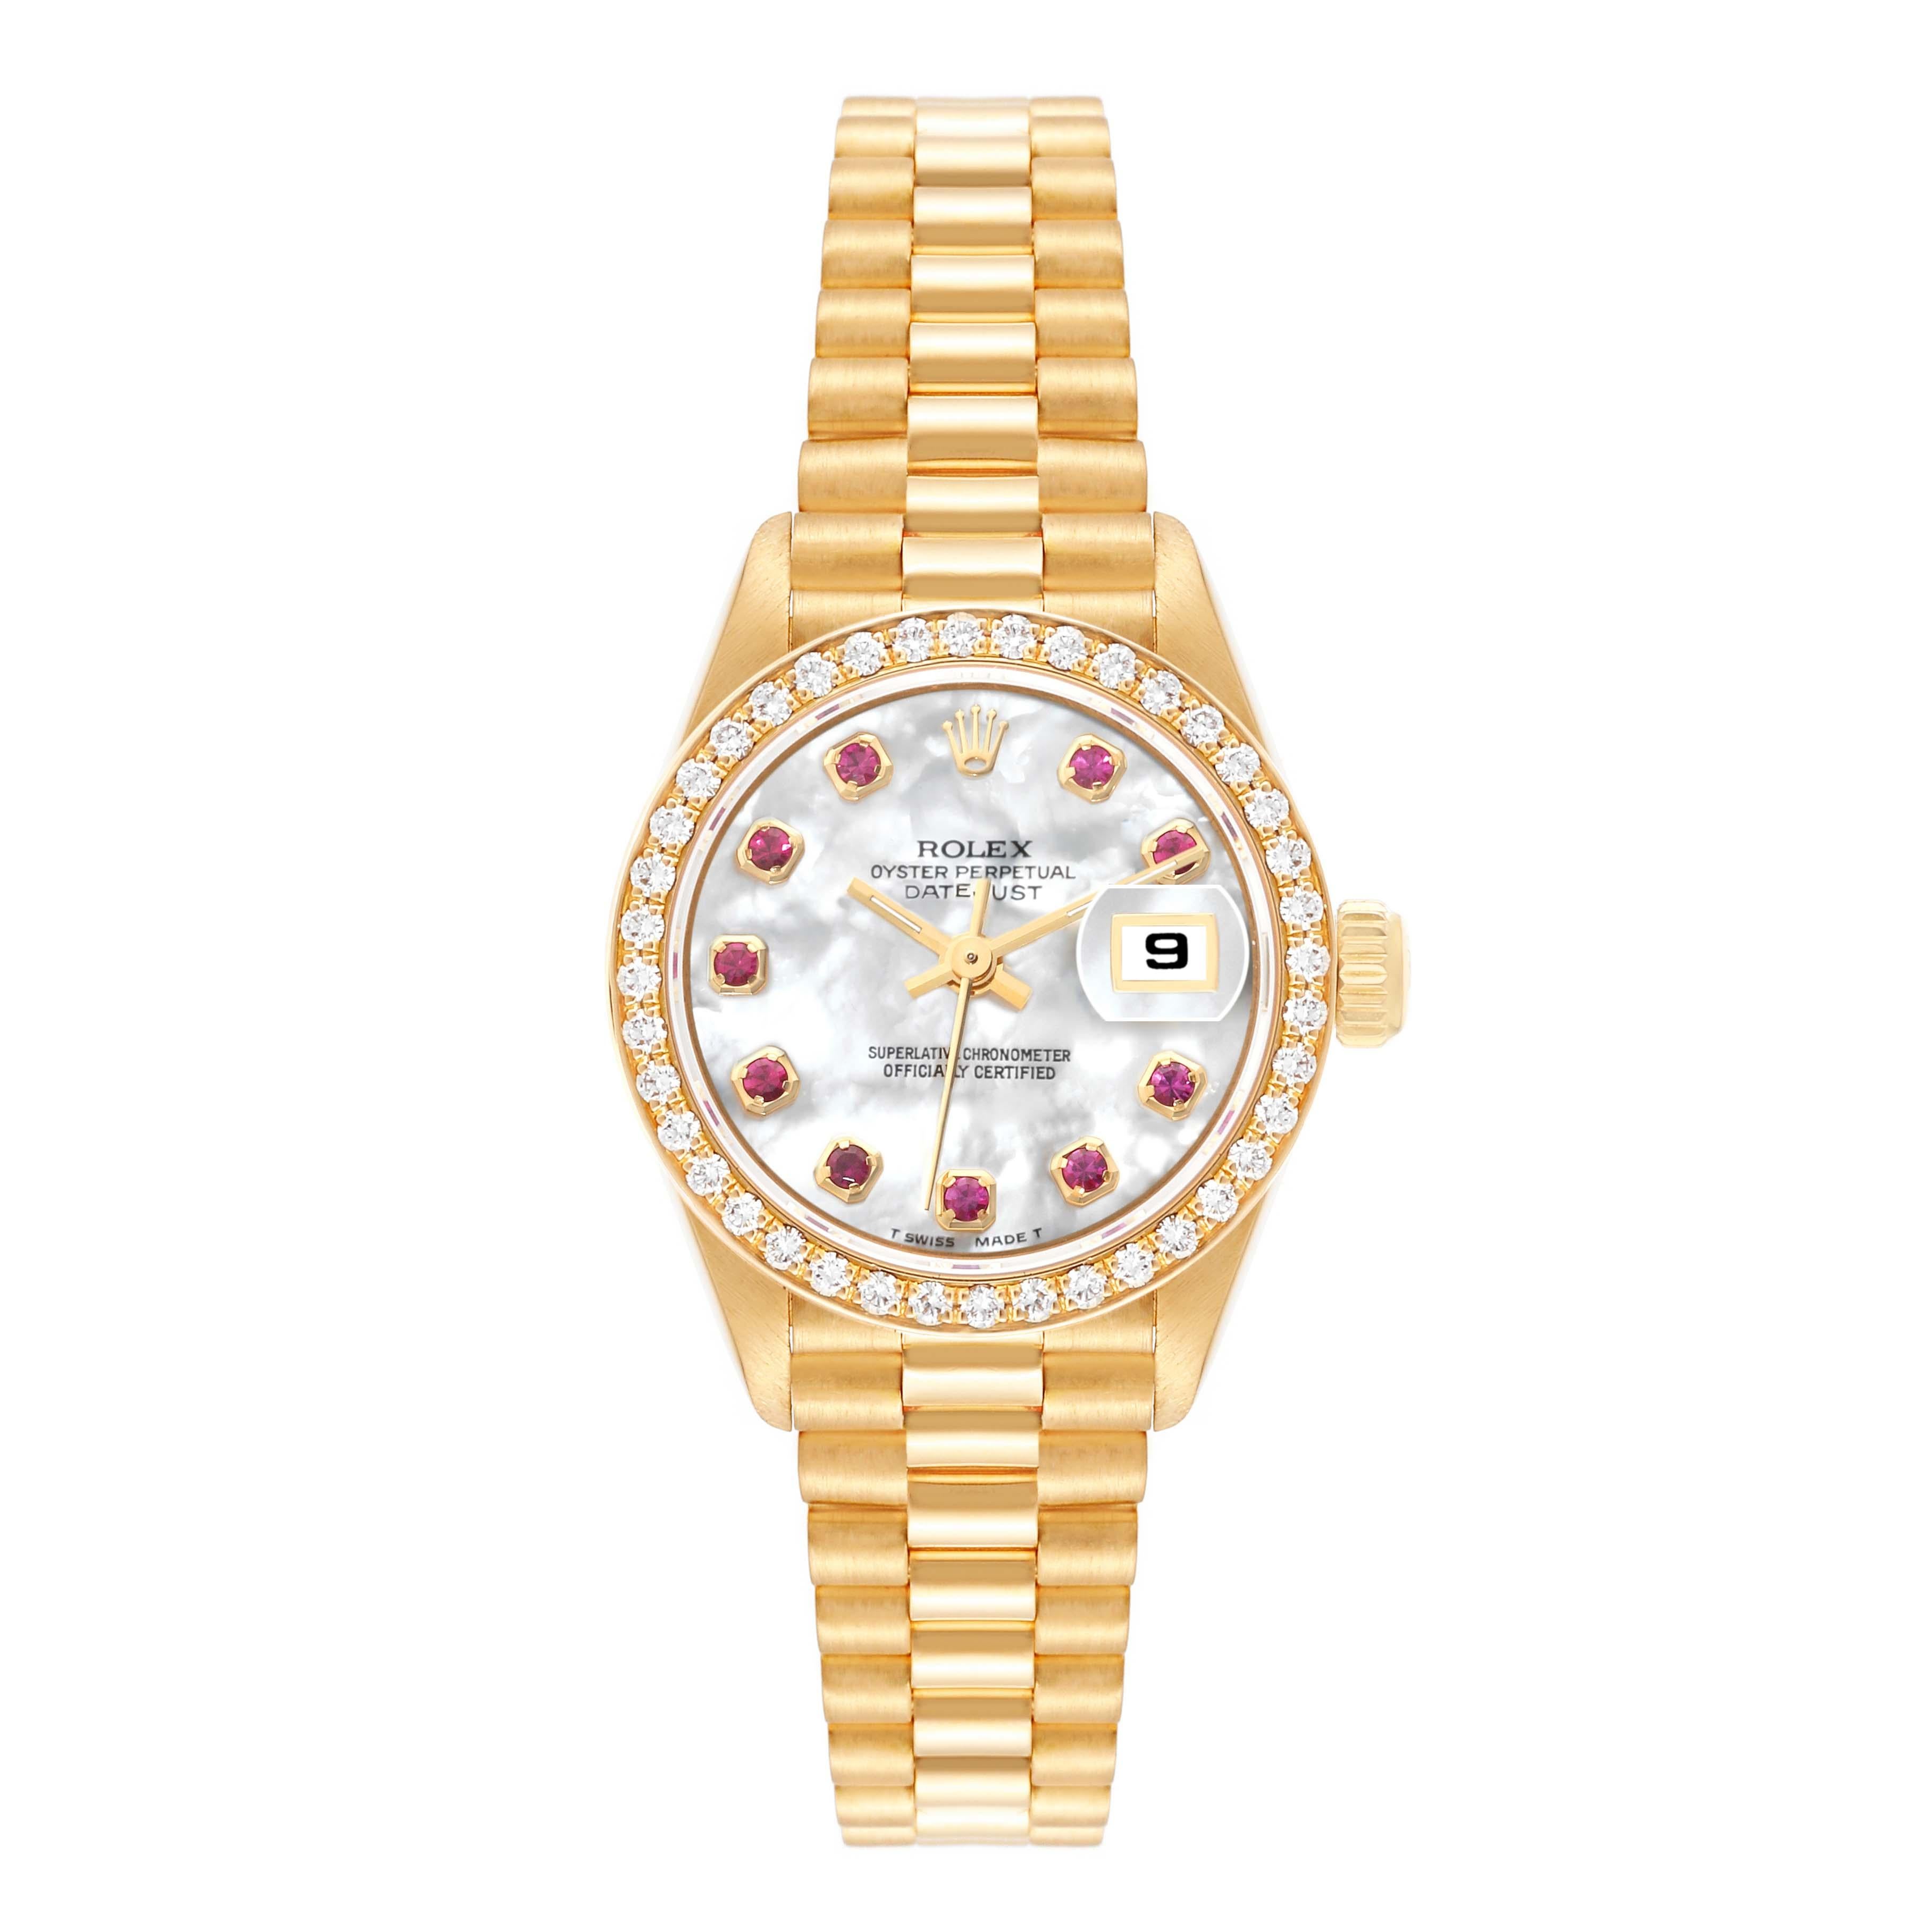 Rolex President Yellow Gold Mother Of Pearl Ruby Dial Diamond Ladies Watch 69138 Box Papers. Officially certified chronometer automatic self-winding movement. 18k yellow gold oyster case 26.0 mm in diameter. Rolex logo on the crown. 18k yellow gold